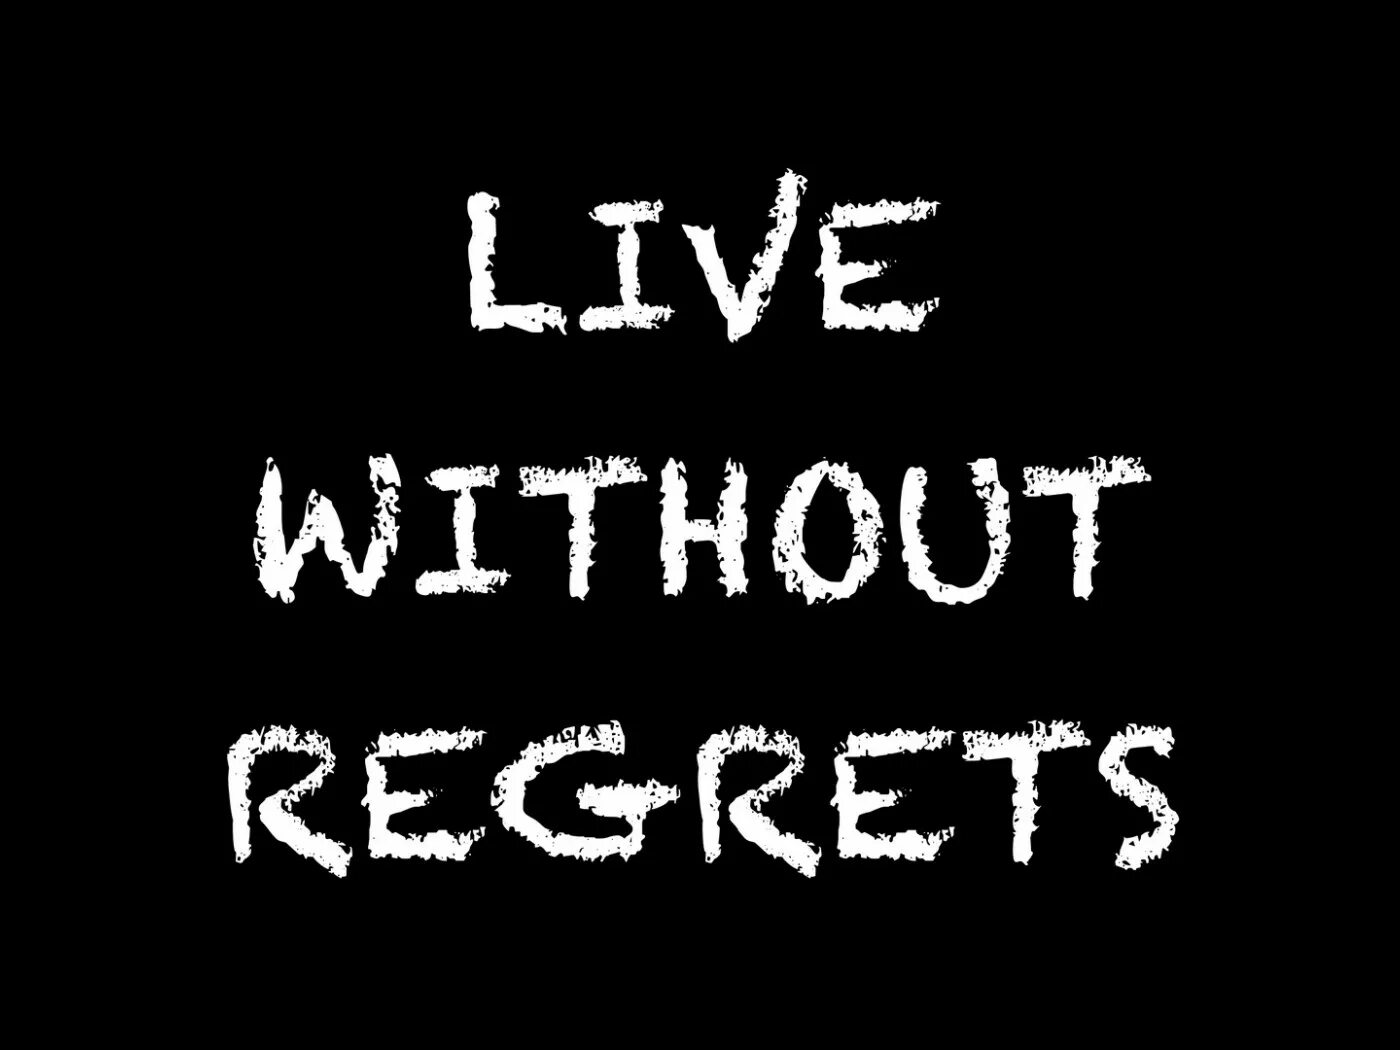 Without regrets. Live without regrets. Обои на рабочий стол со словами. Live without regrets перевод на русский. Надпись Live.